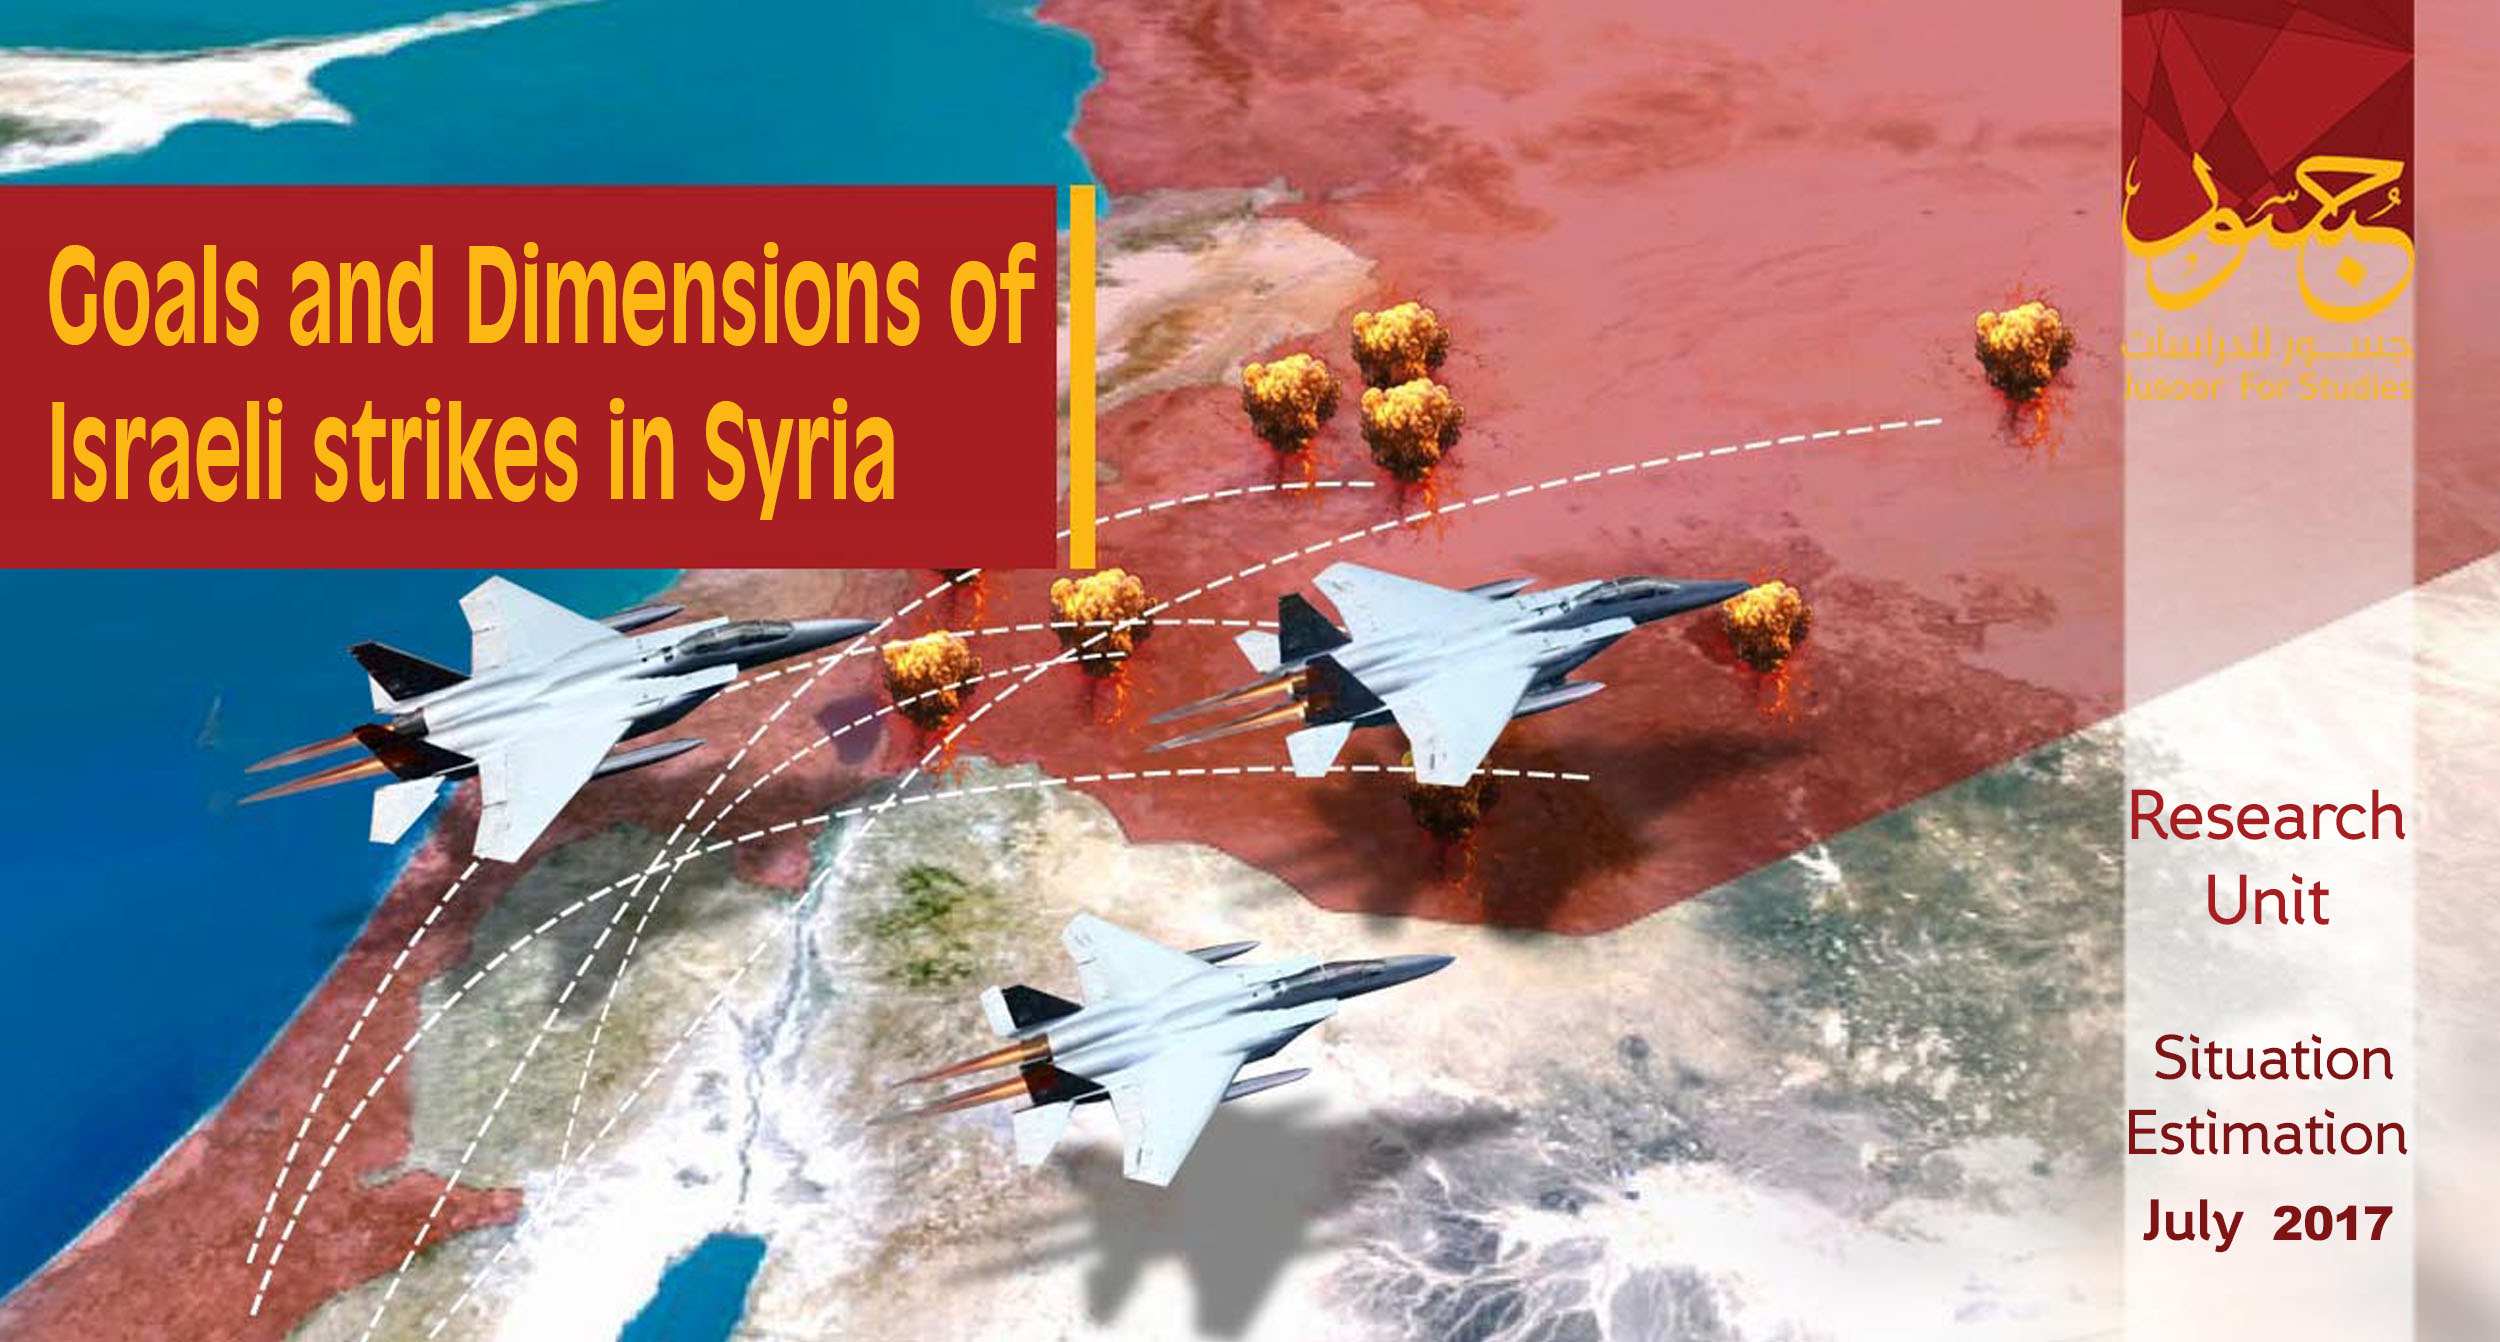 Goals and Dimensions of Israeli strikes in Syria